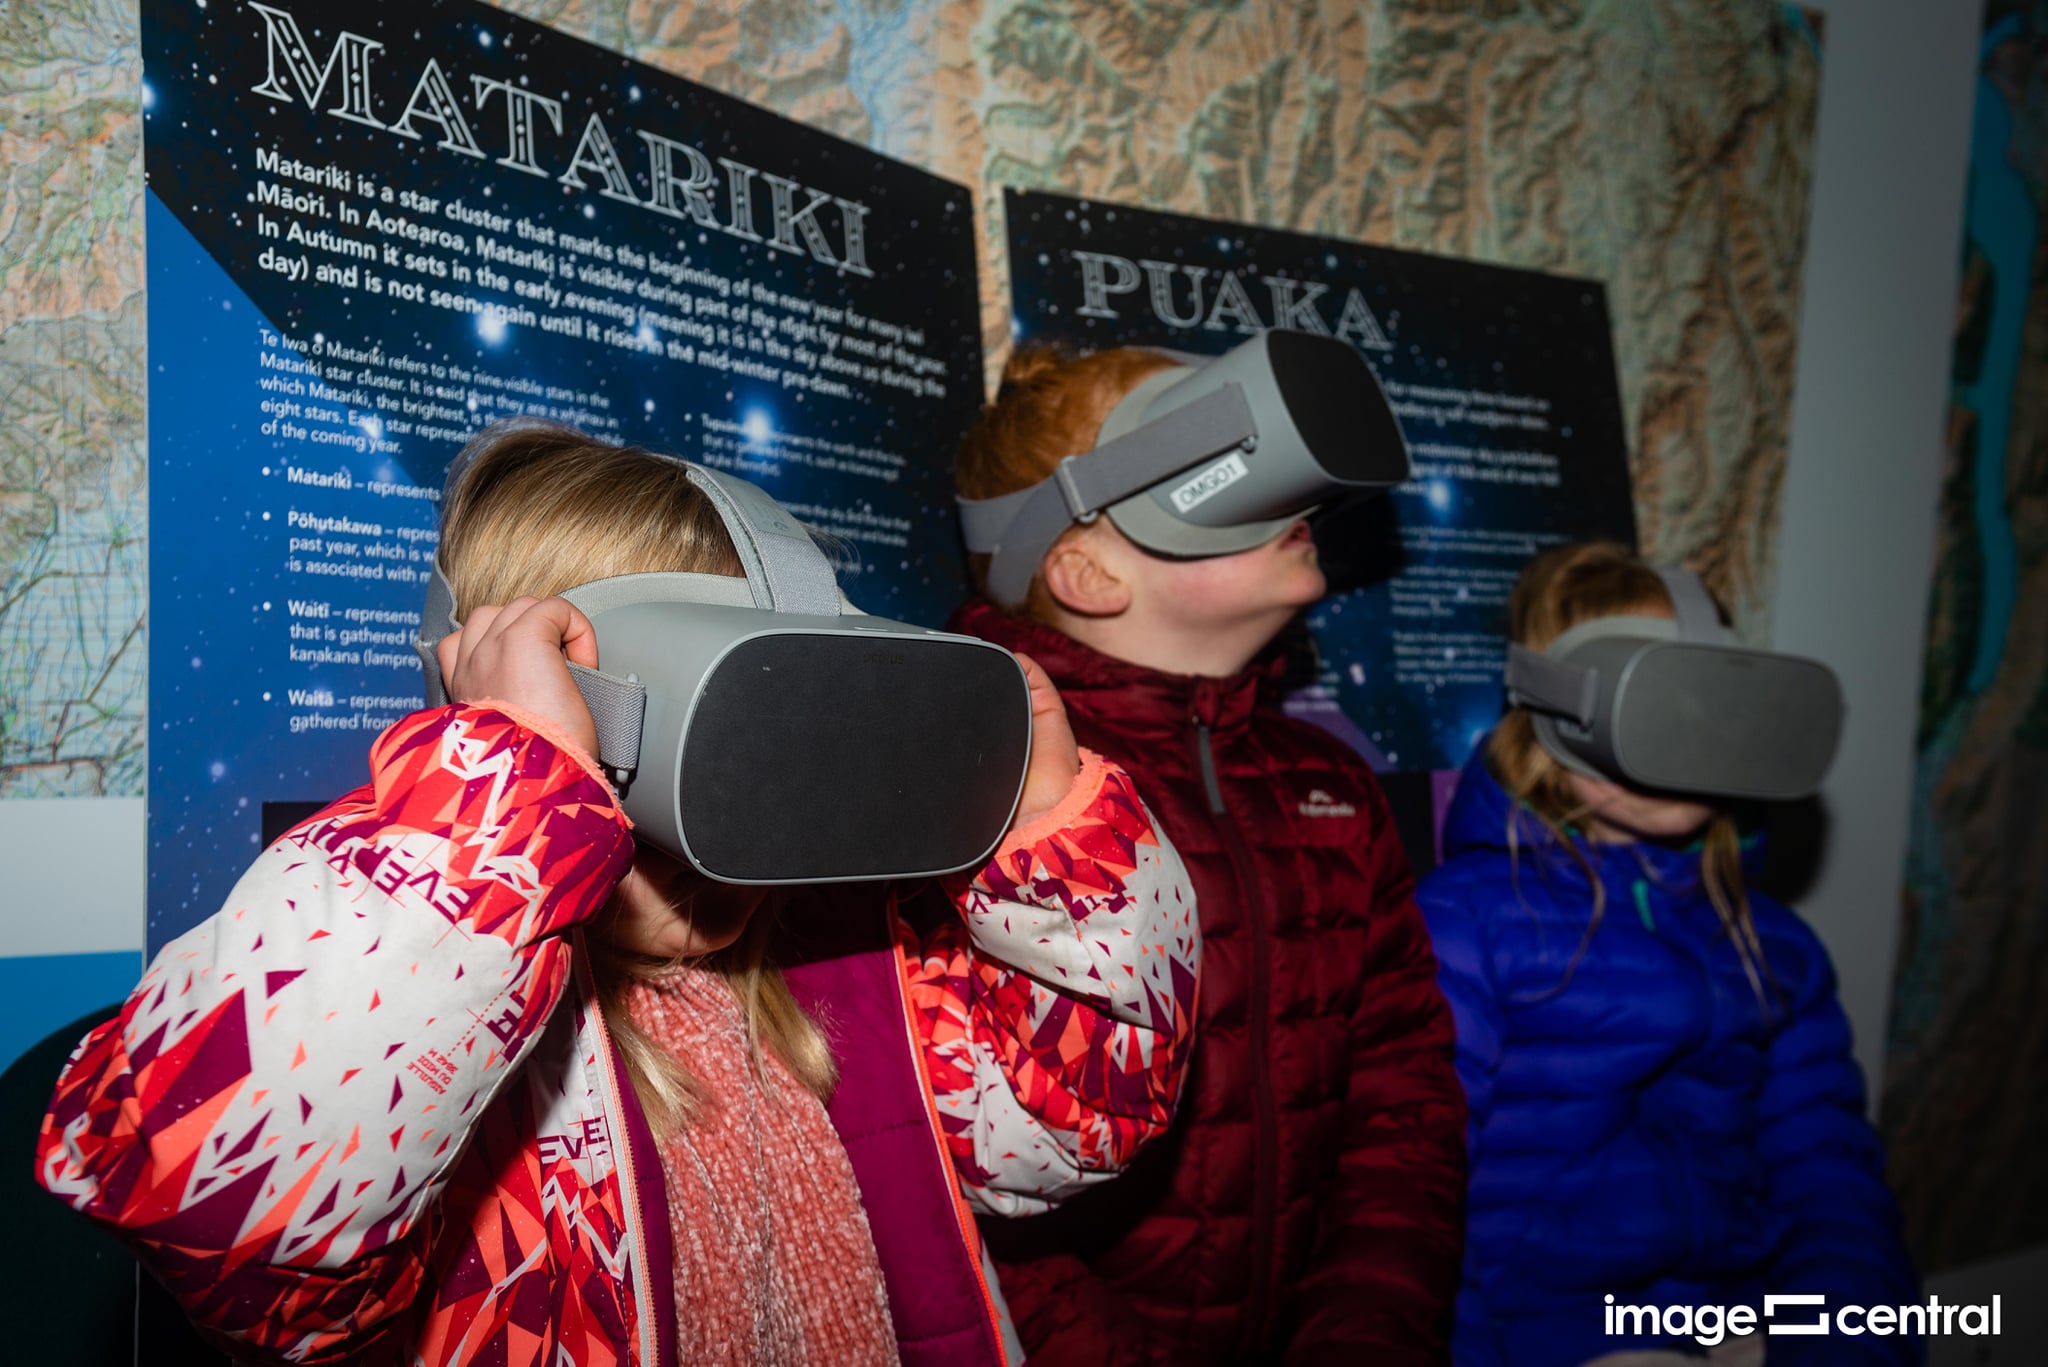 Checking out the VR headsets - Matariki Celebration in Alexandra 2021 - Photo by Clare Toia-Bailey